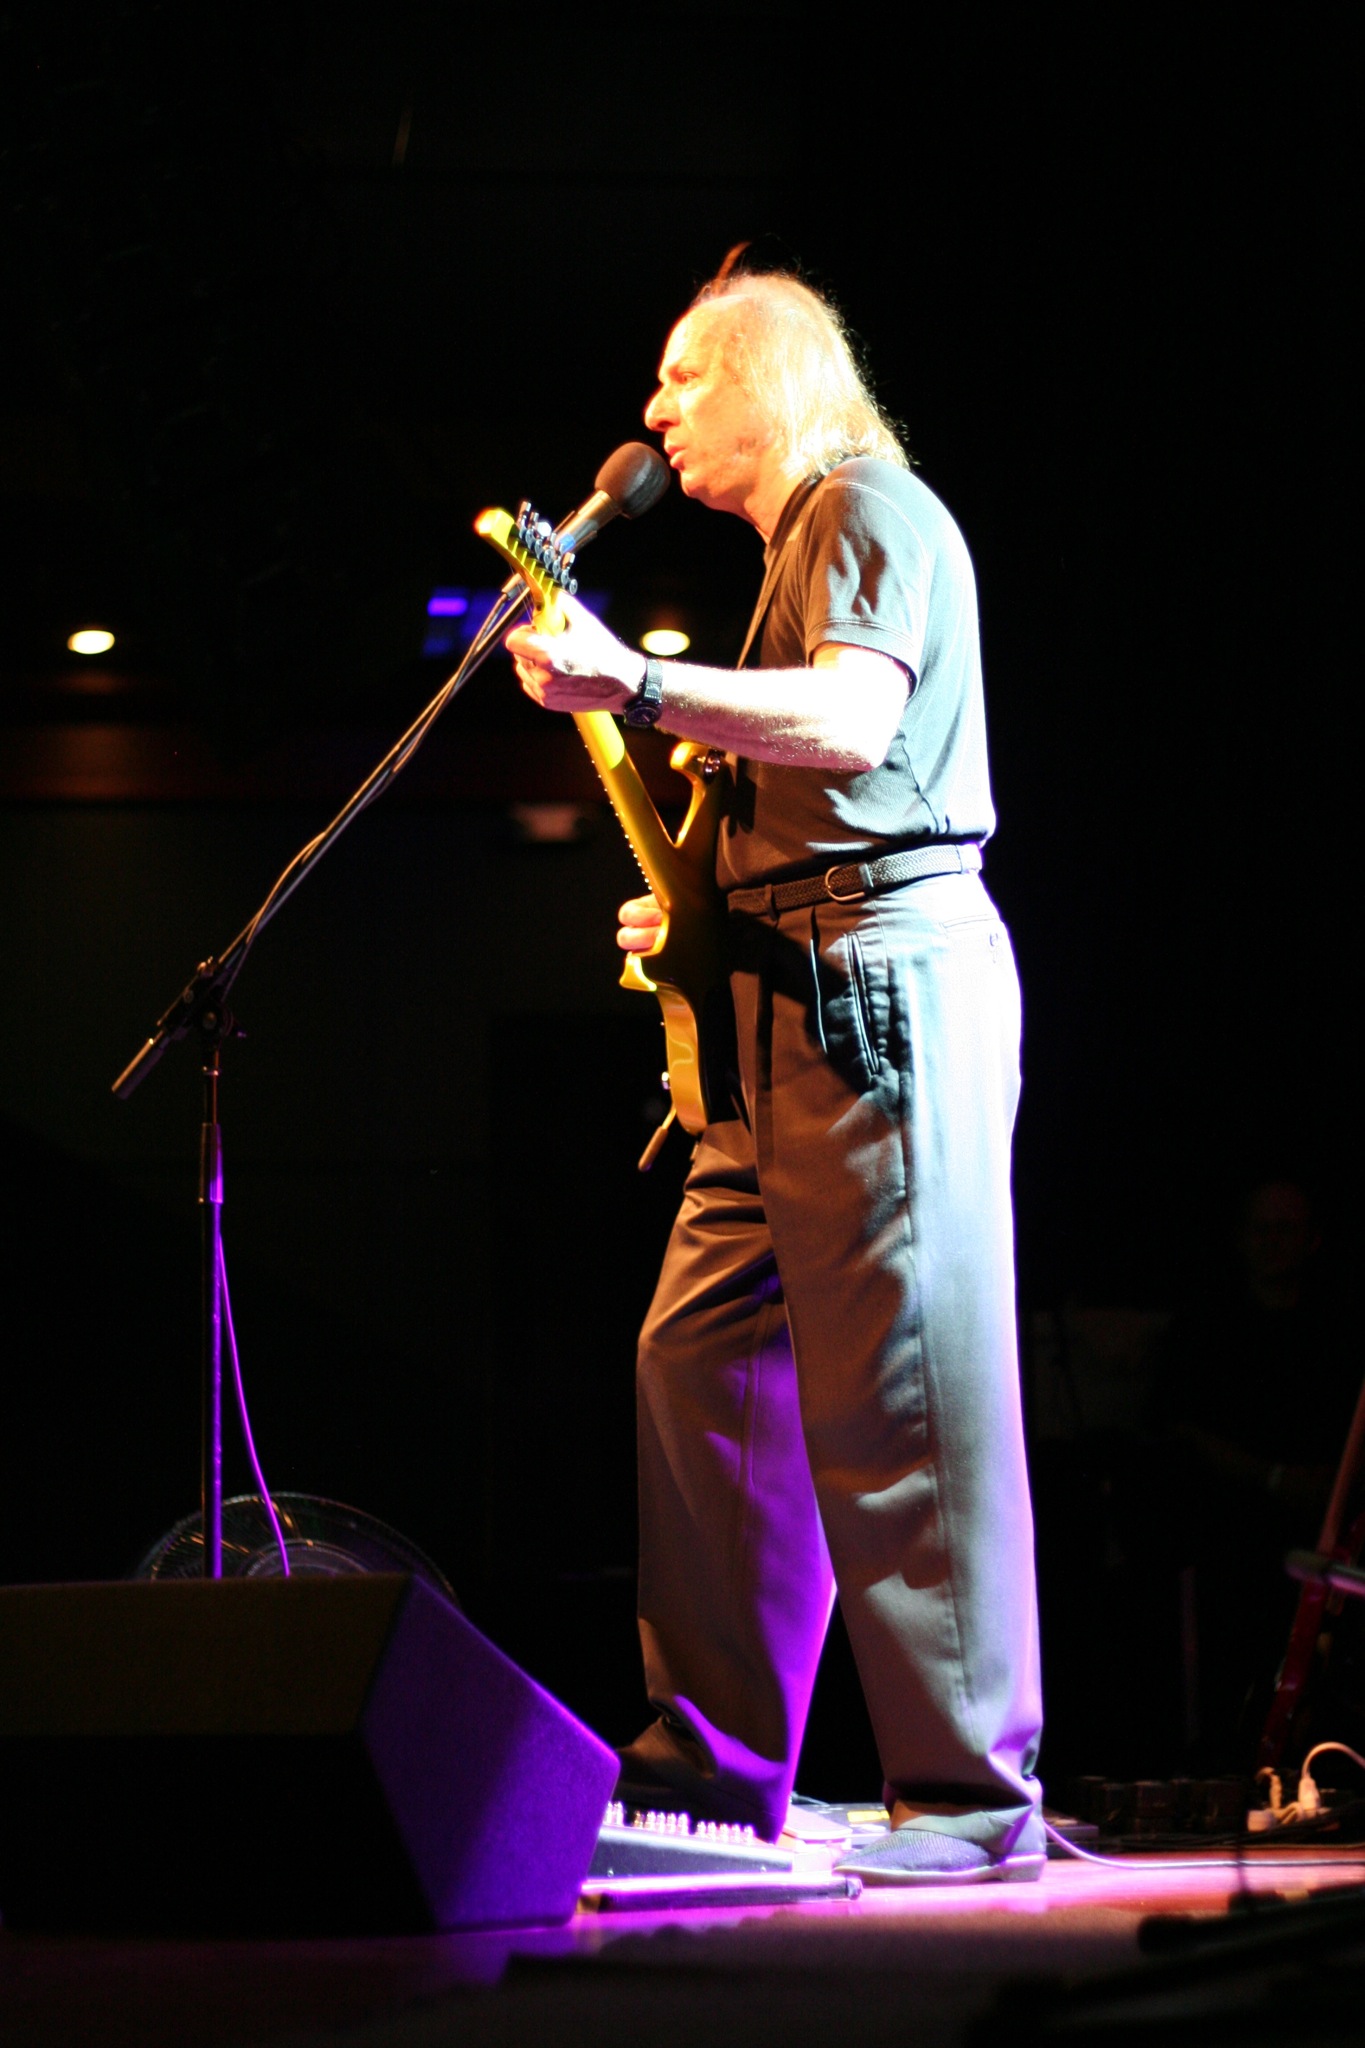 a man in overalls on a stage holding a microphone